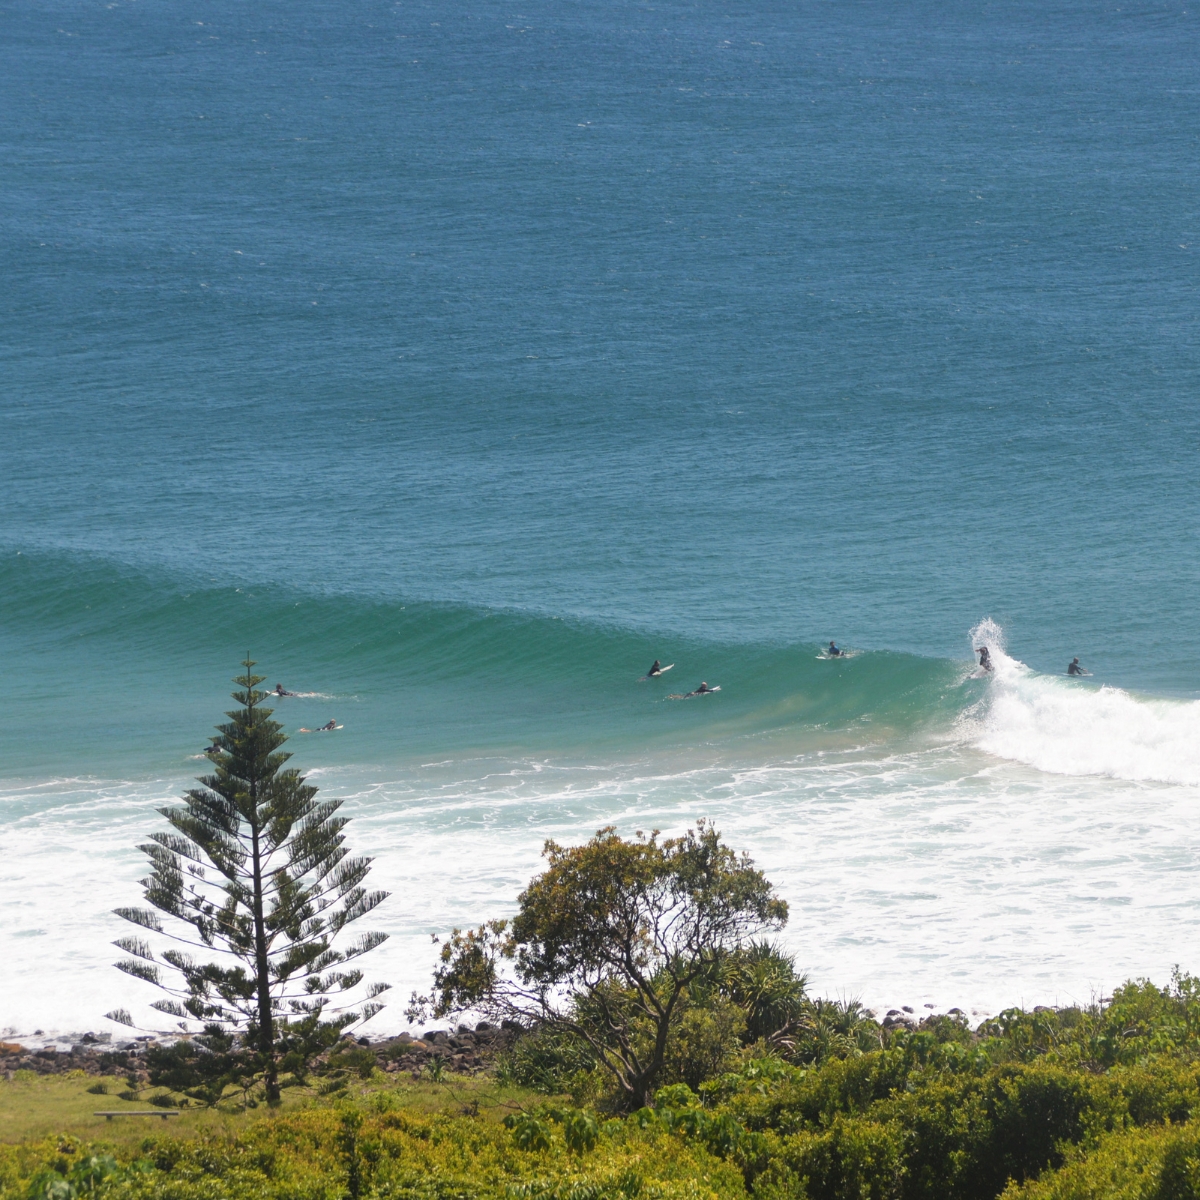 Admire skilled surfers riding the waves at the world-famous surf breaks in Lennox Head